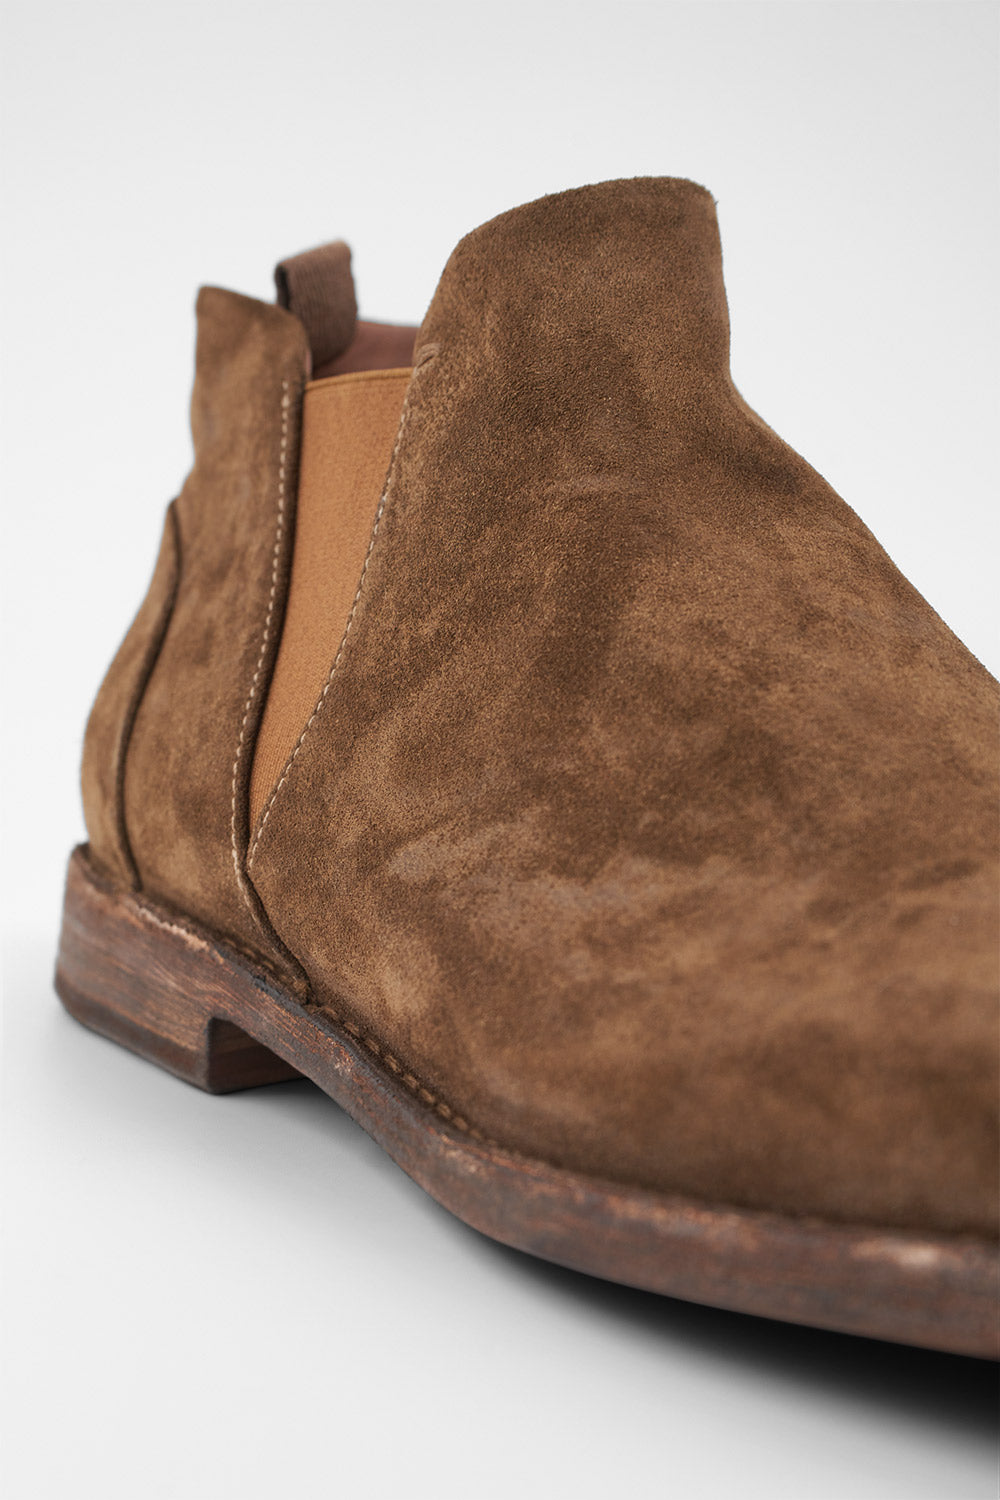 HAVEN barley-brown suede low chelsea boots.